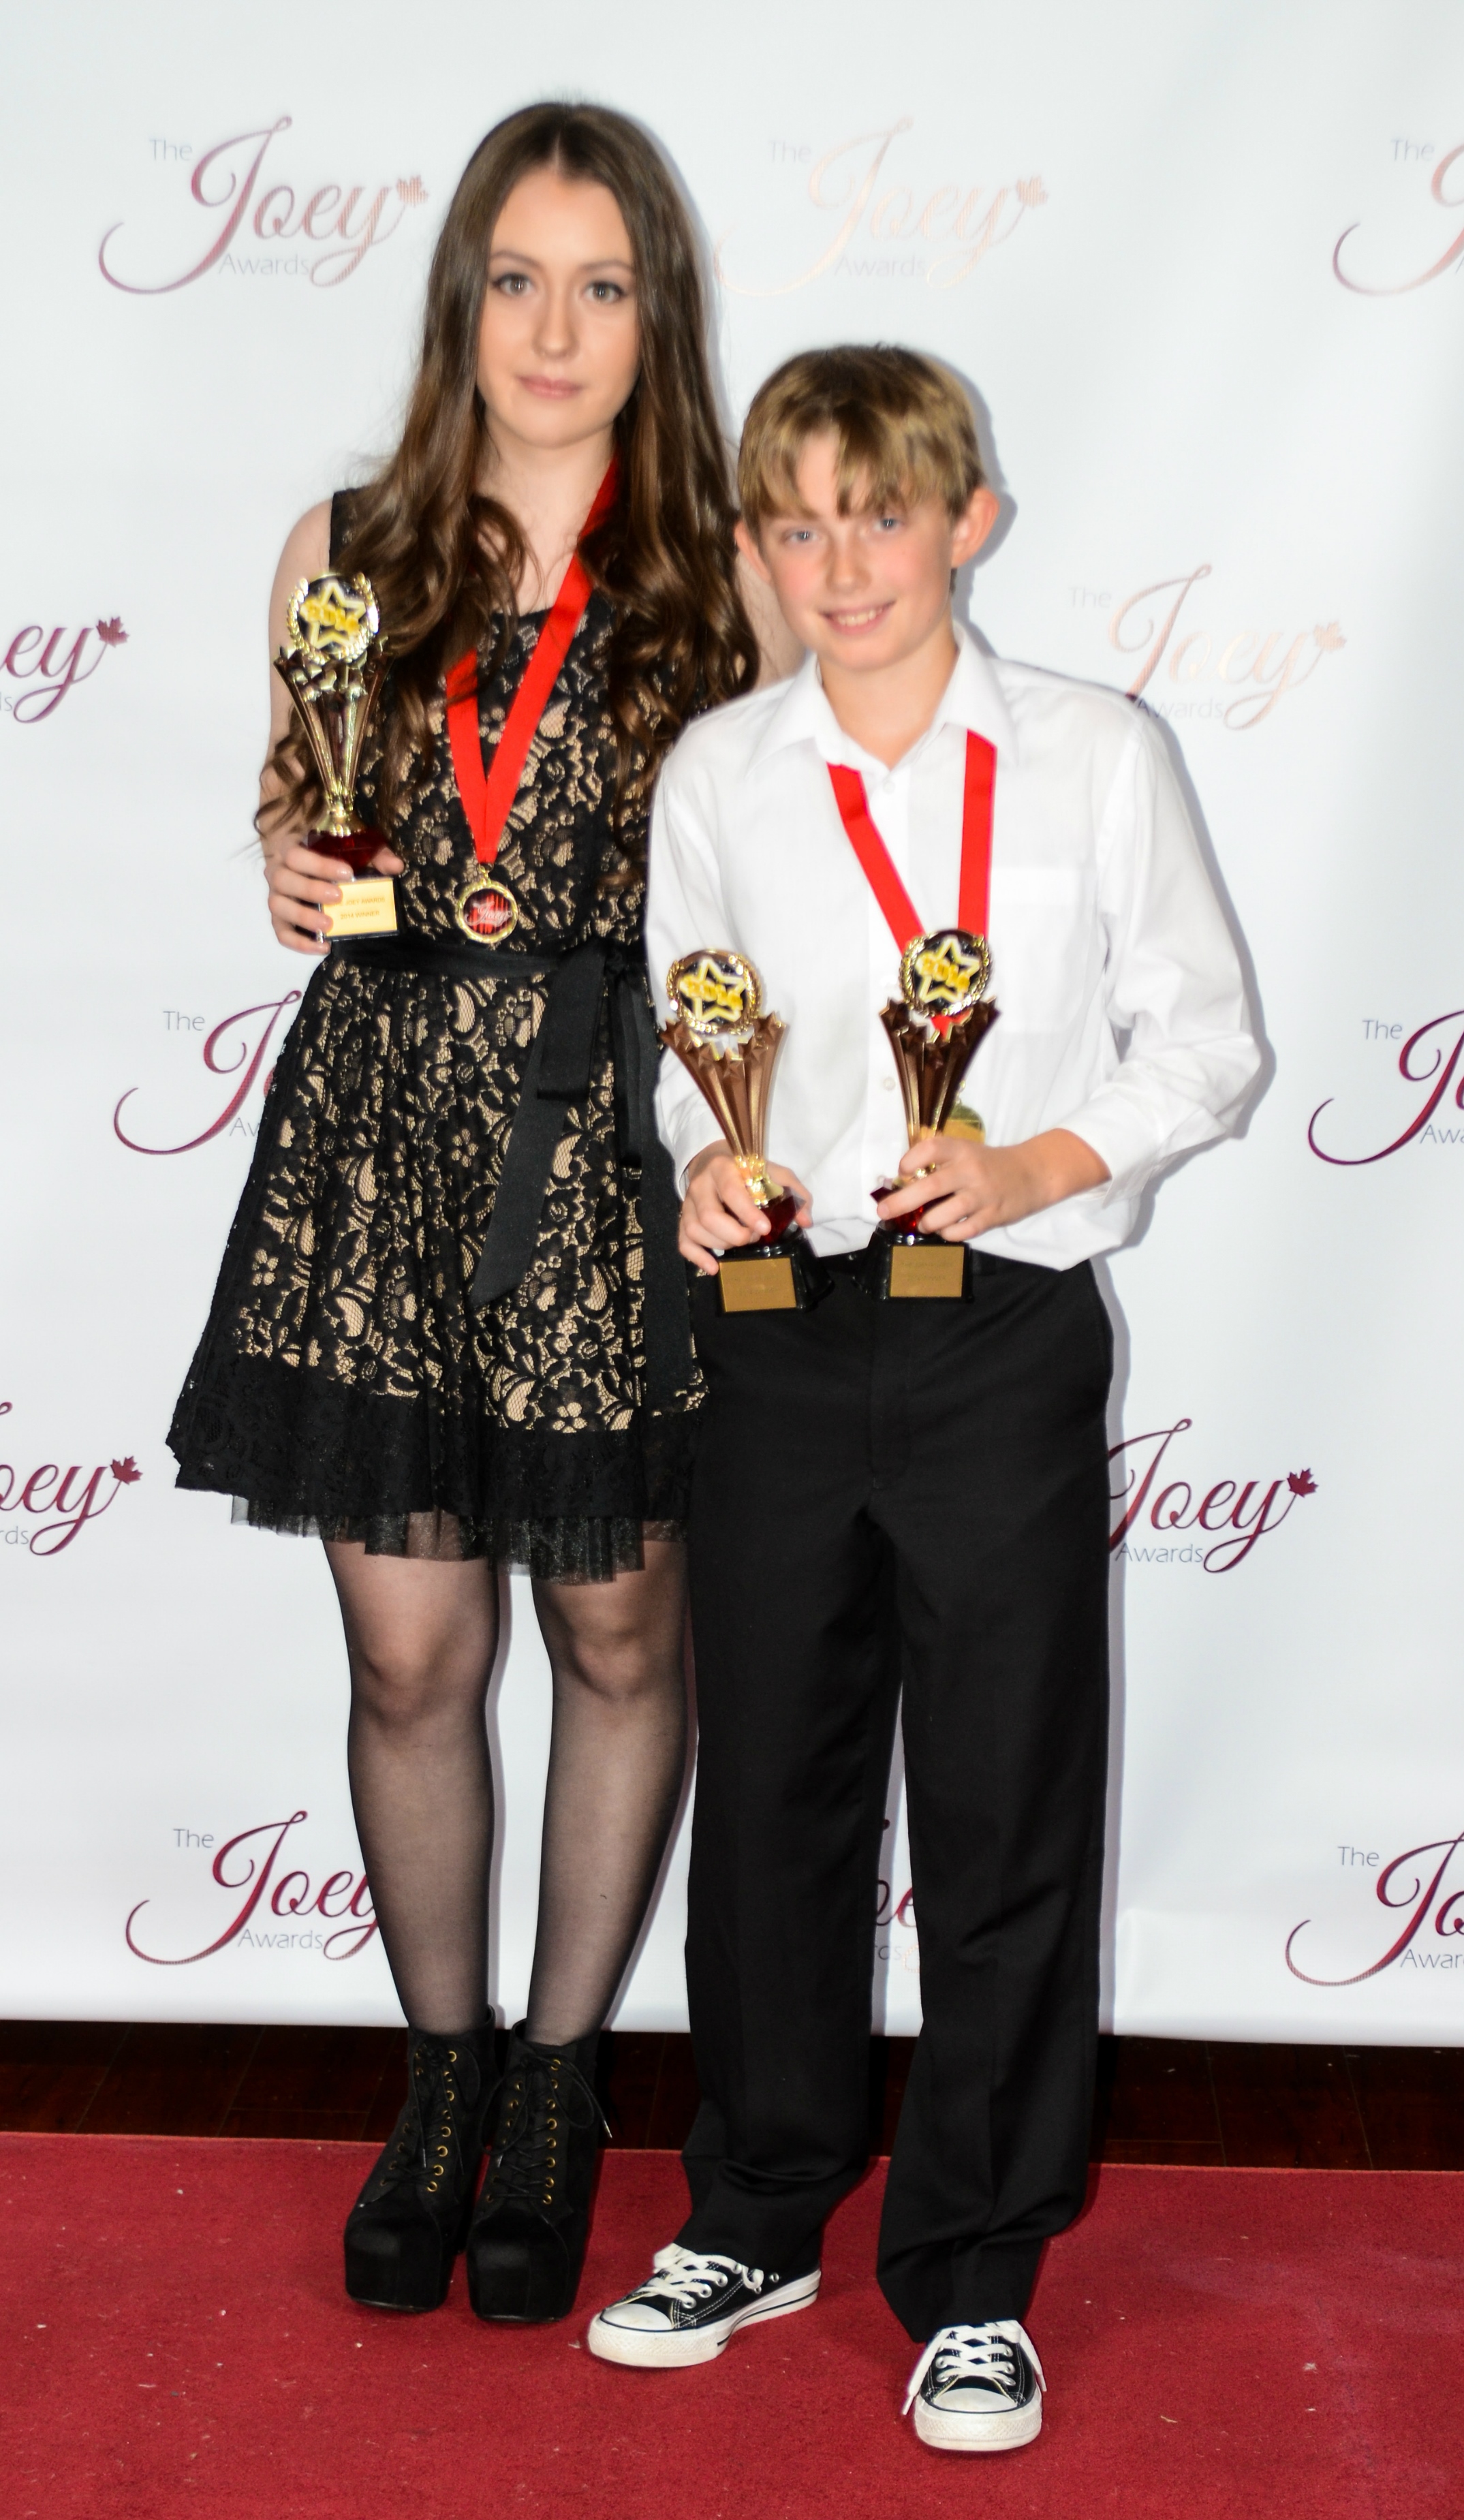 Katherine Evans and Rowan Longworth at event of The Joey Awards, Vancouver (2014)